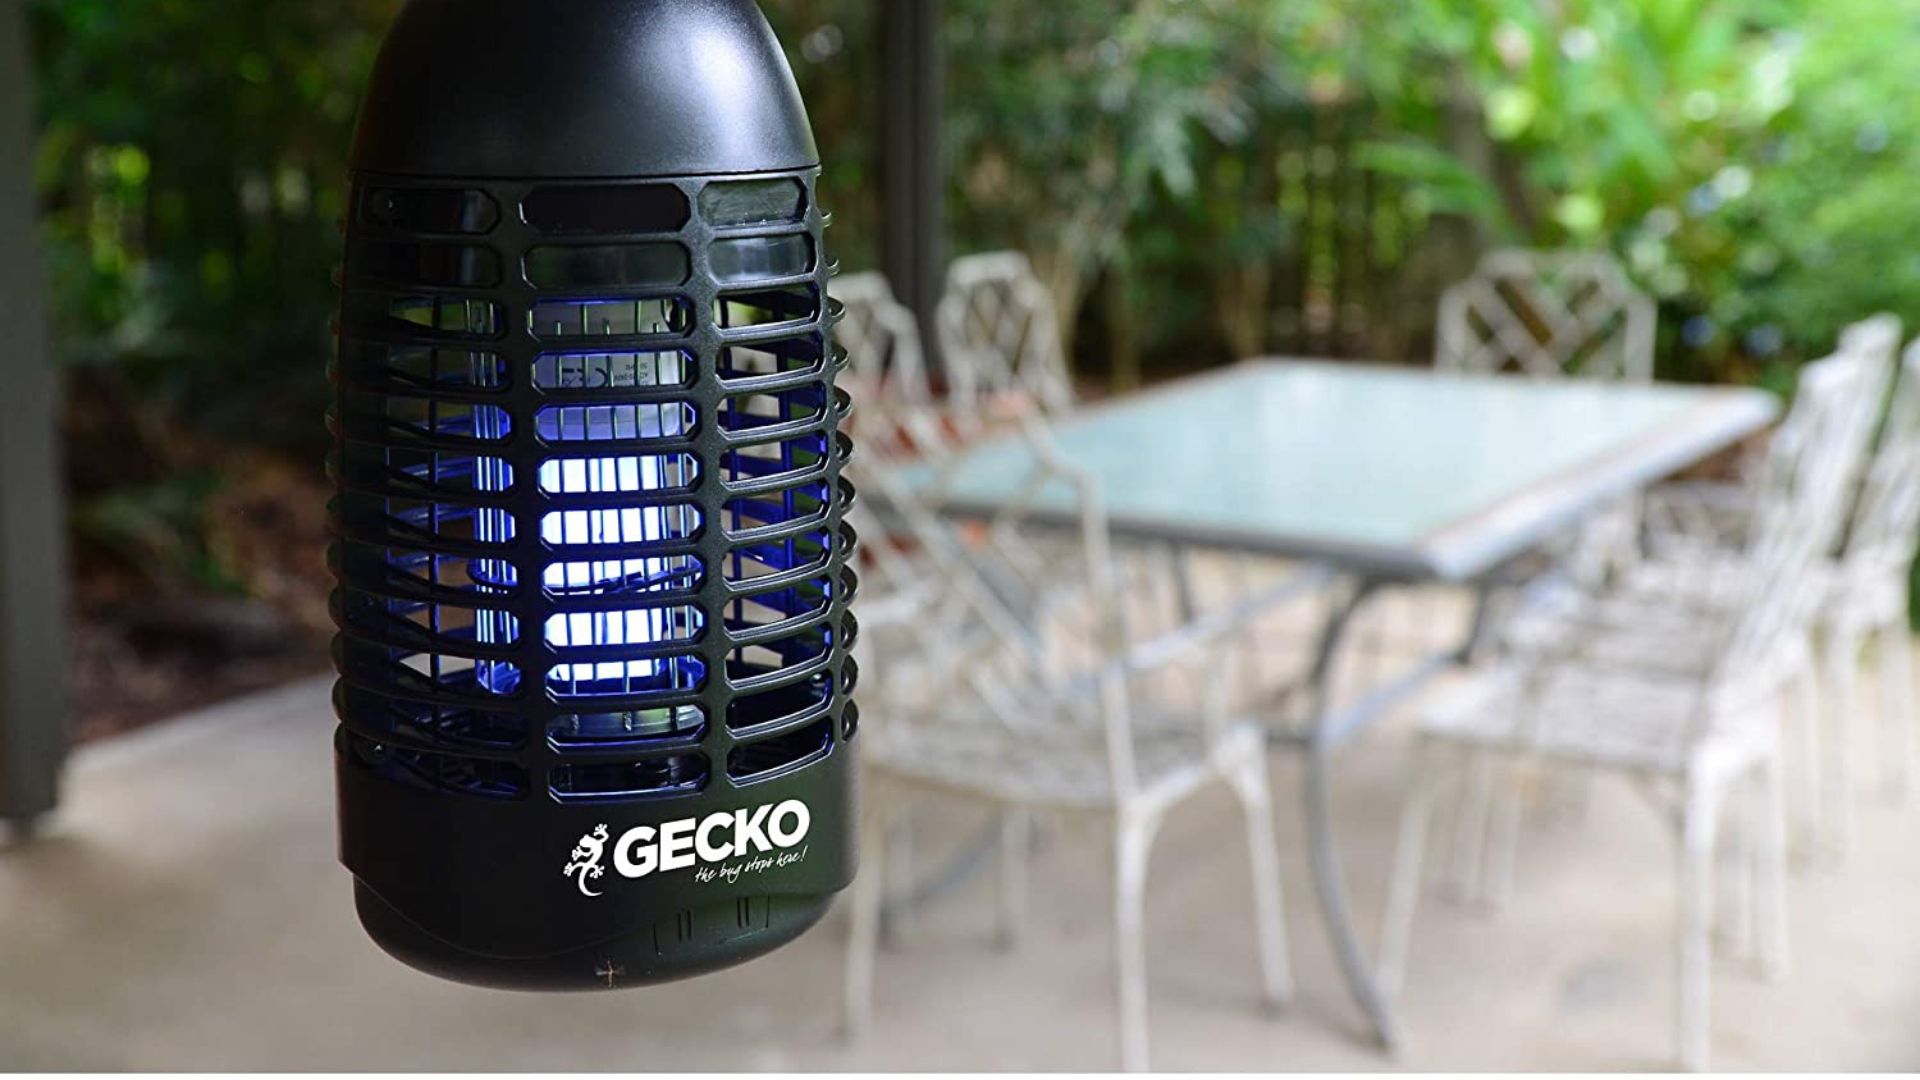 11 Best Bug Zappers And Repellants That Actually Work